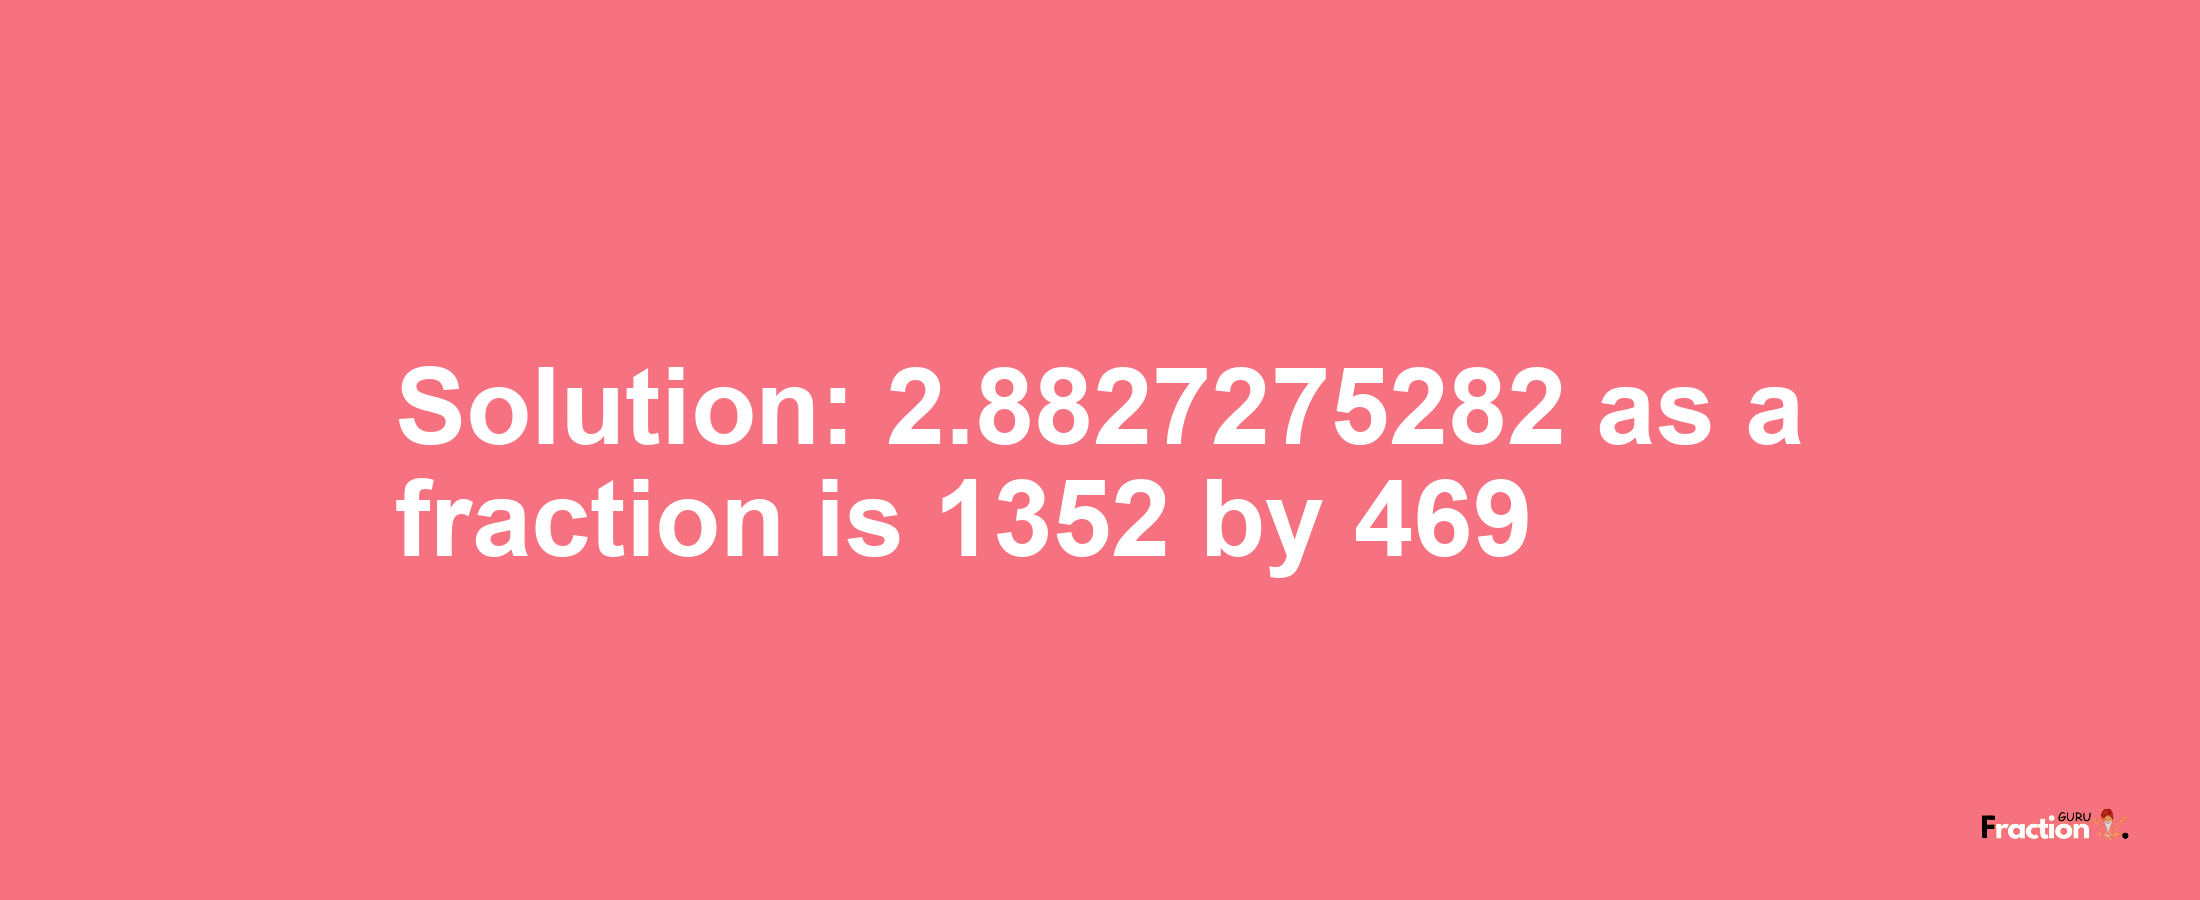 Solution:2.8827275282 as a fraction is 1352/469